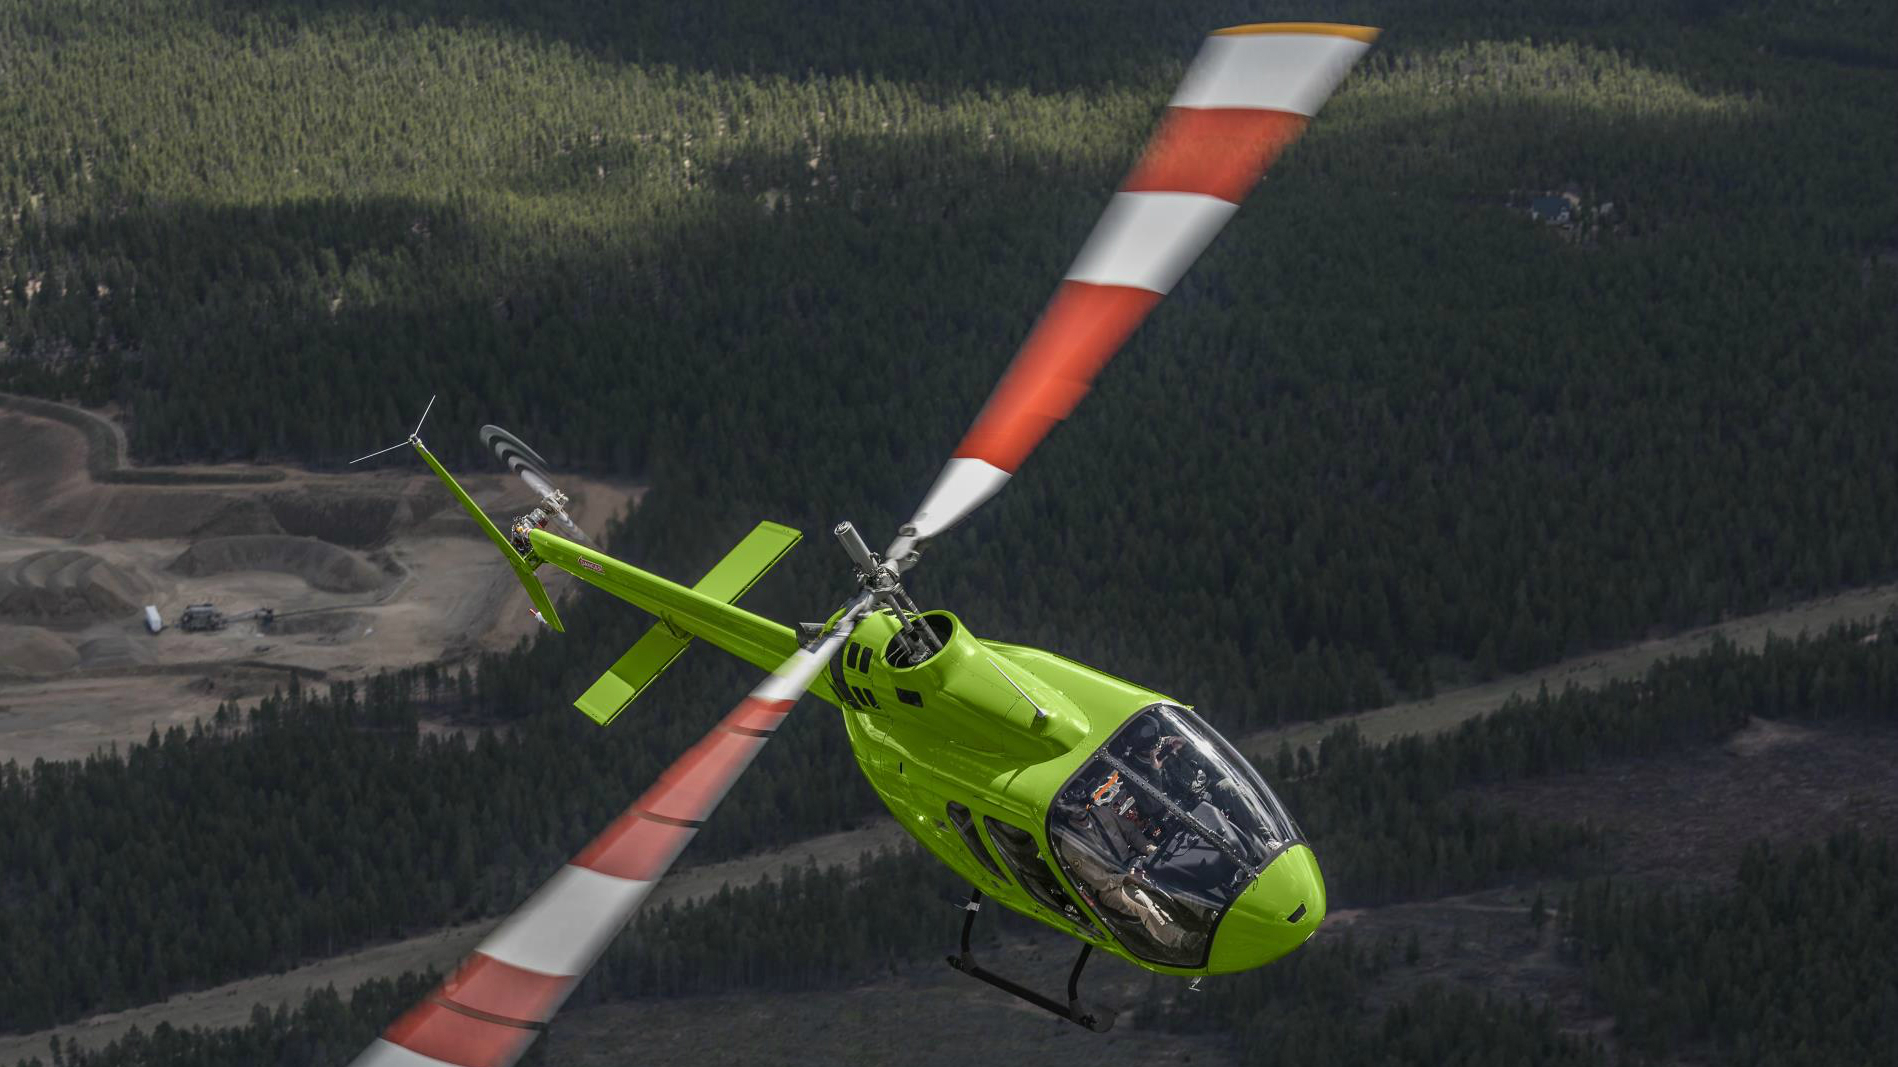 most expensive helicopters jet ranger x 2